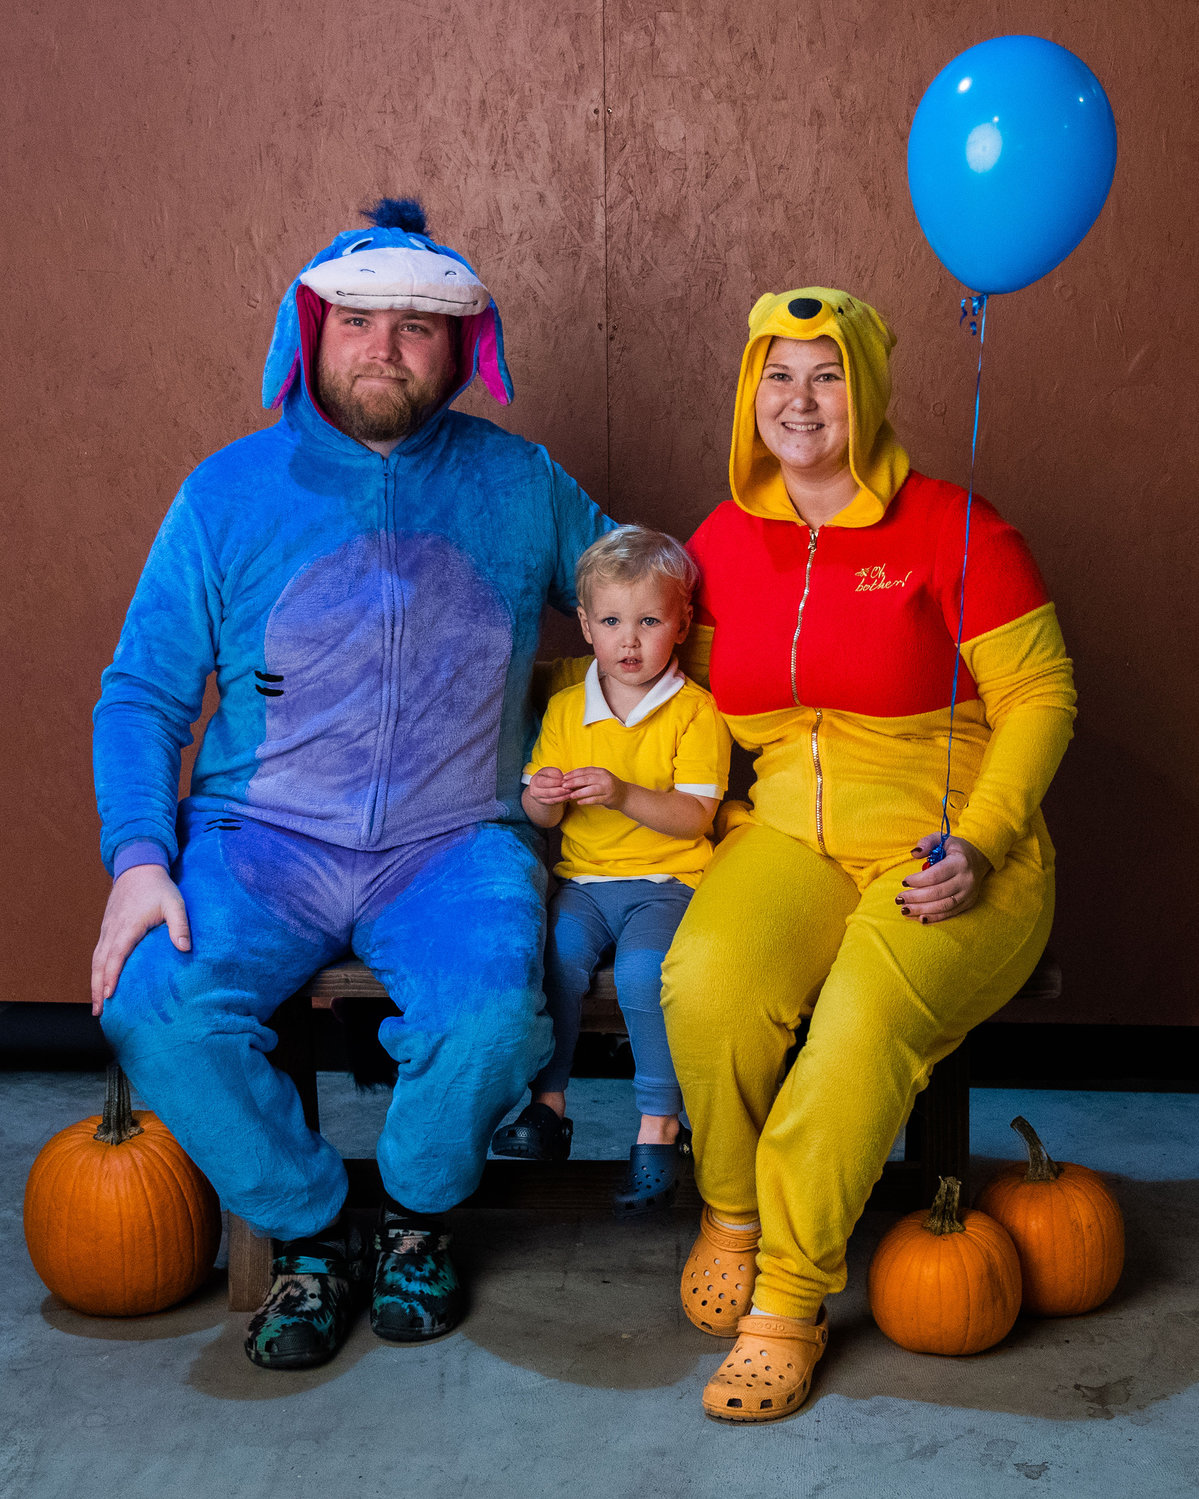 Leo Lloyd, 2, center, poses for a photo alongside Jesse and Kristi dressed as Eeyore and Winnie the Pooh during a Halloween Carnival at The White Space in downtown Centralia on Monday.